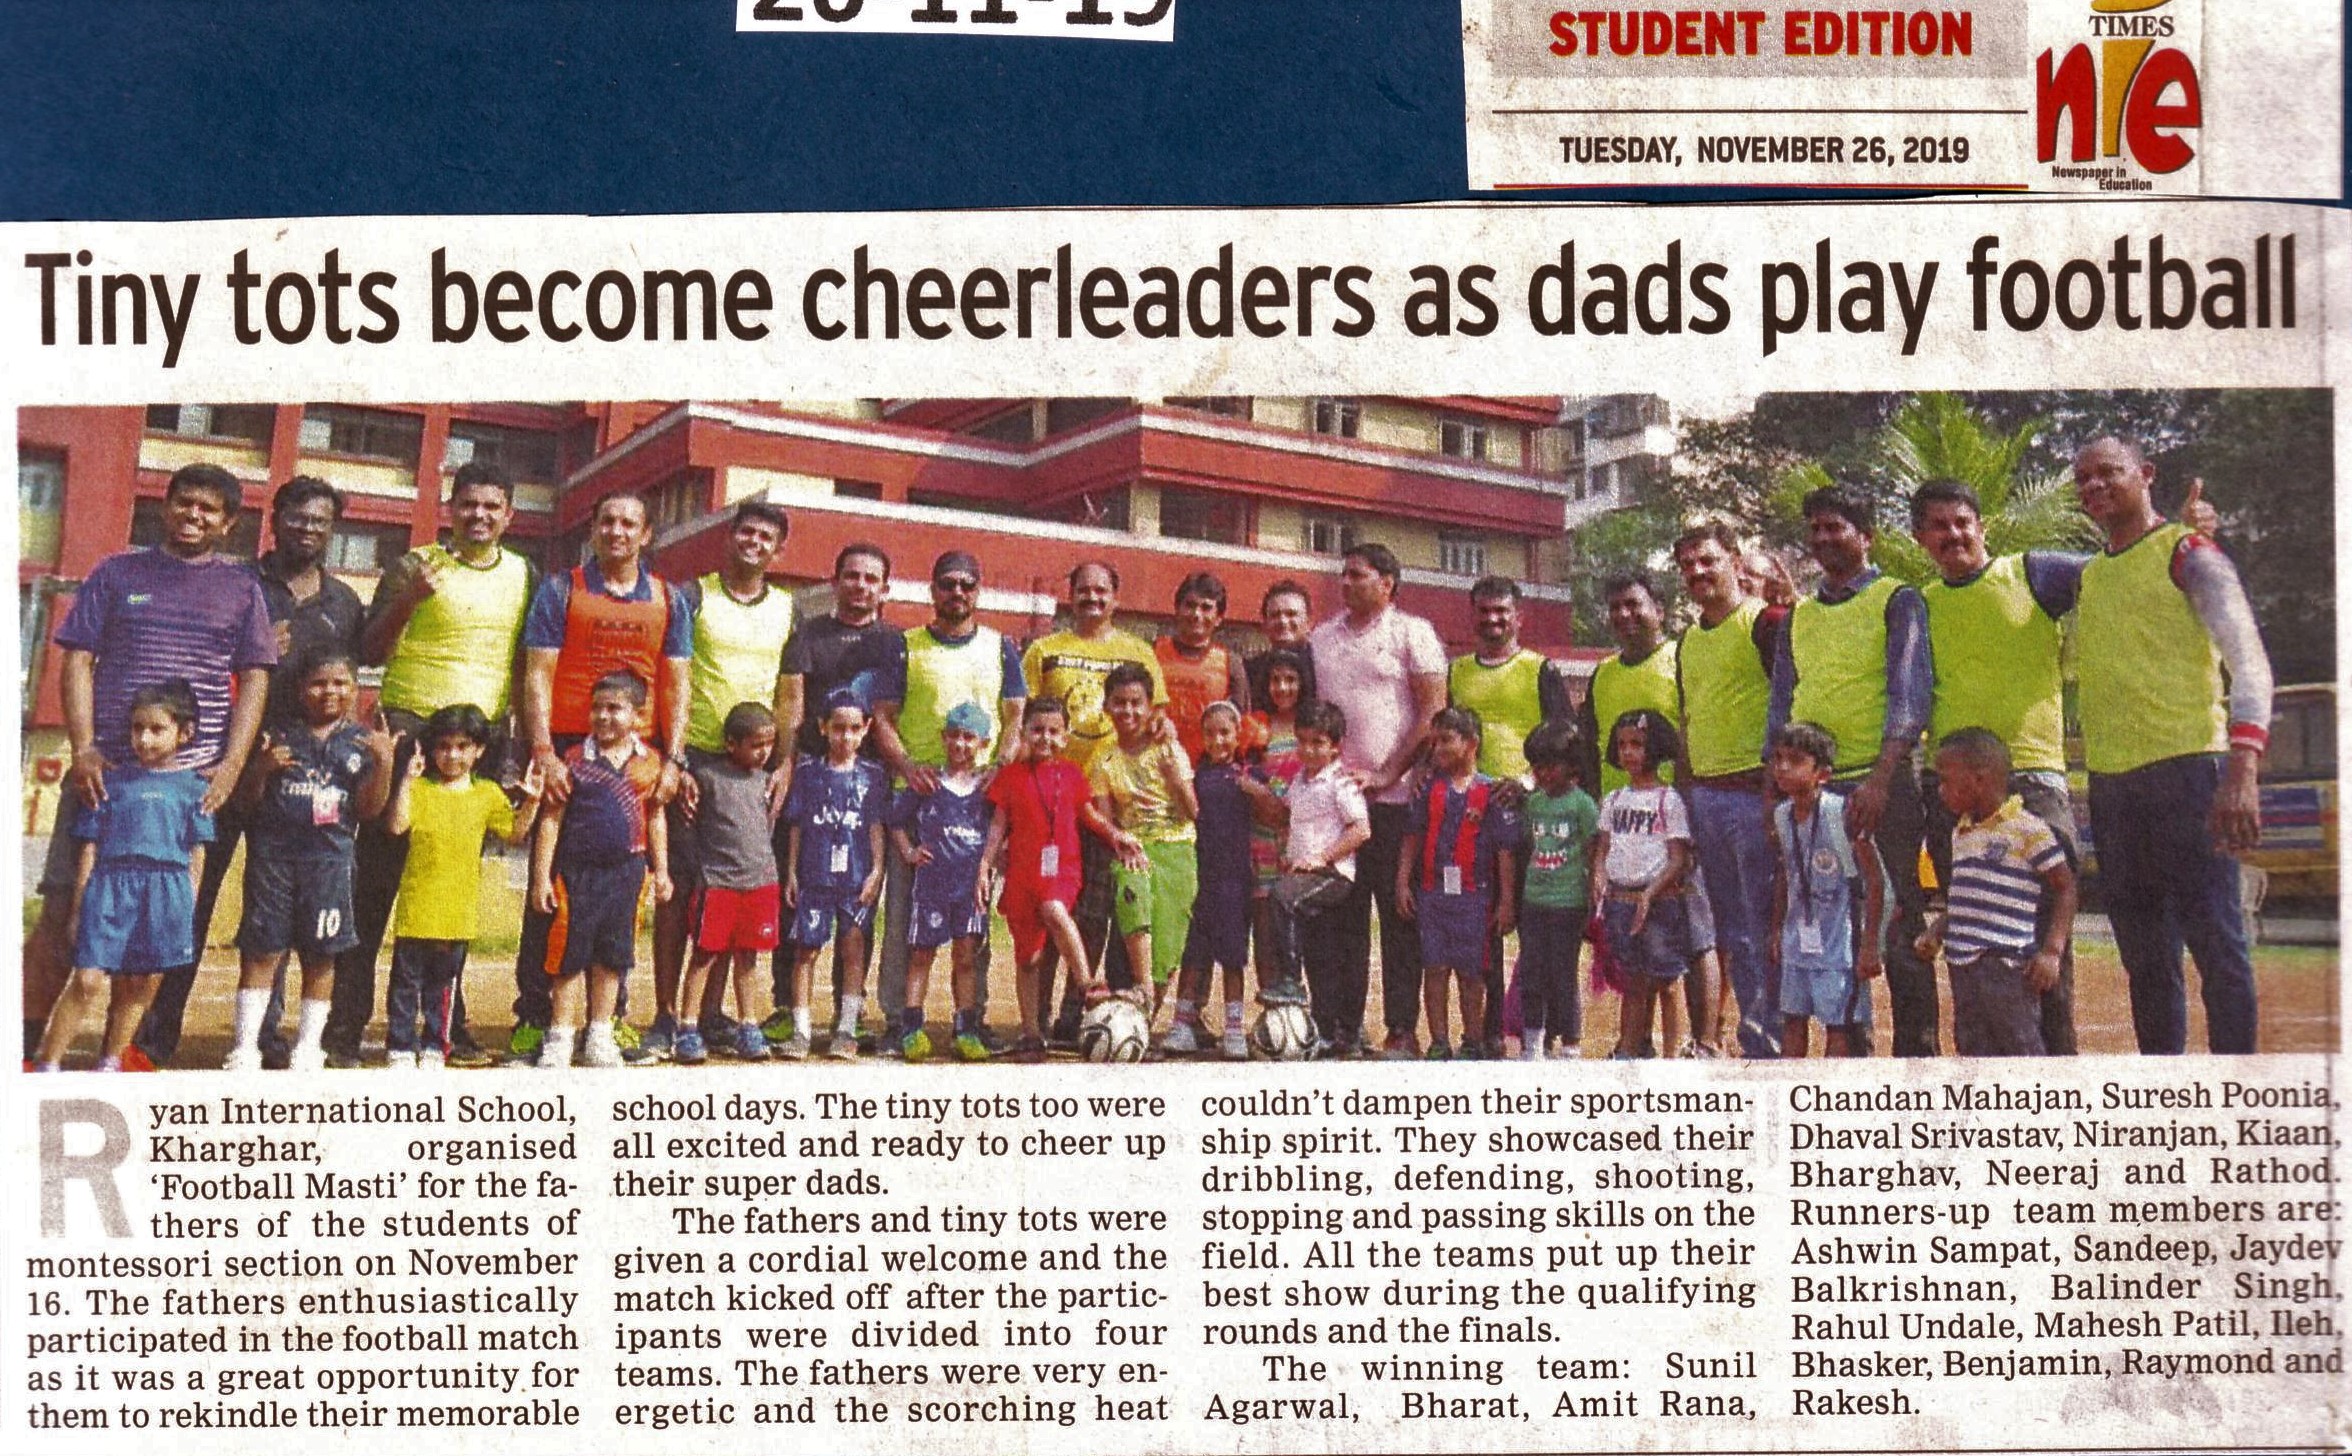 Tiny tots become cheerleaders as dads play football was mentioned in Times NIE - Ryan International School, Kharghar